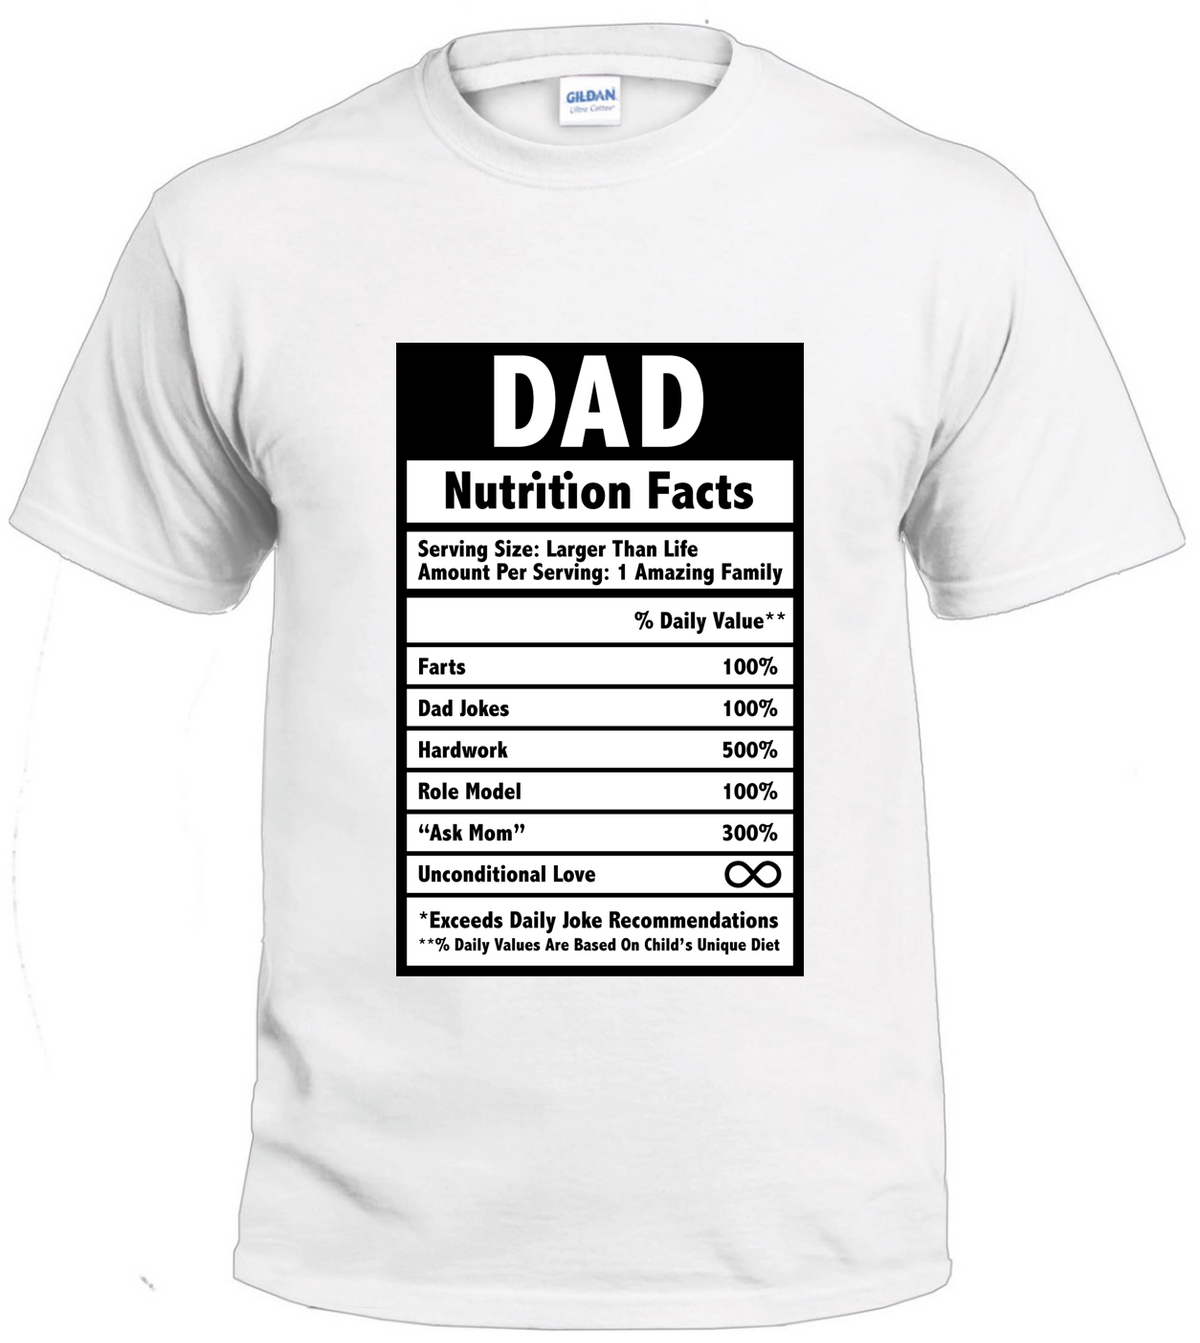 Dad Nutrition Facts t-shirt